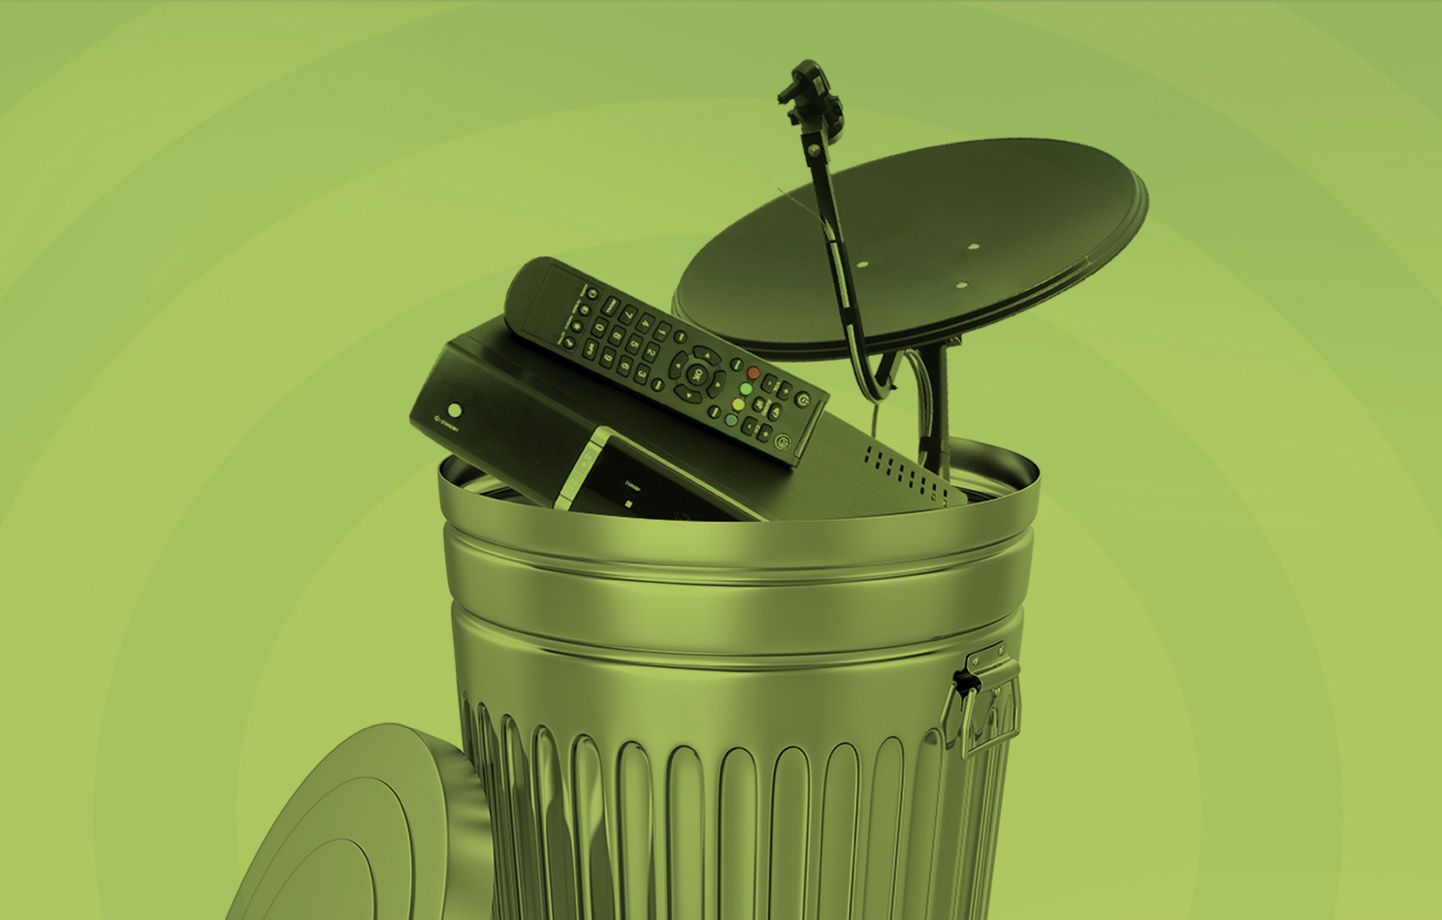 image result of a metal trash can with a satellite dish and cable box inside the trash can